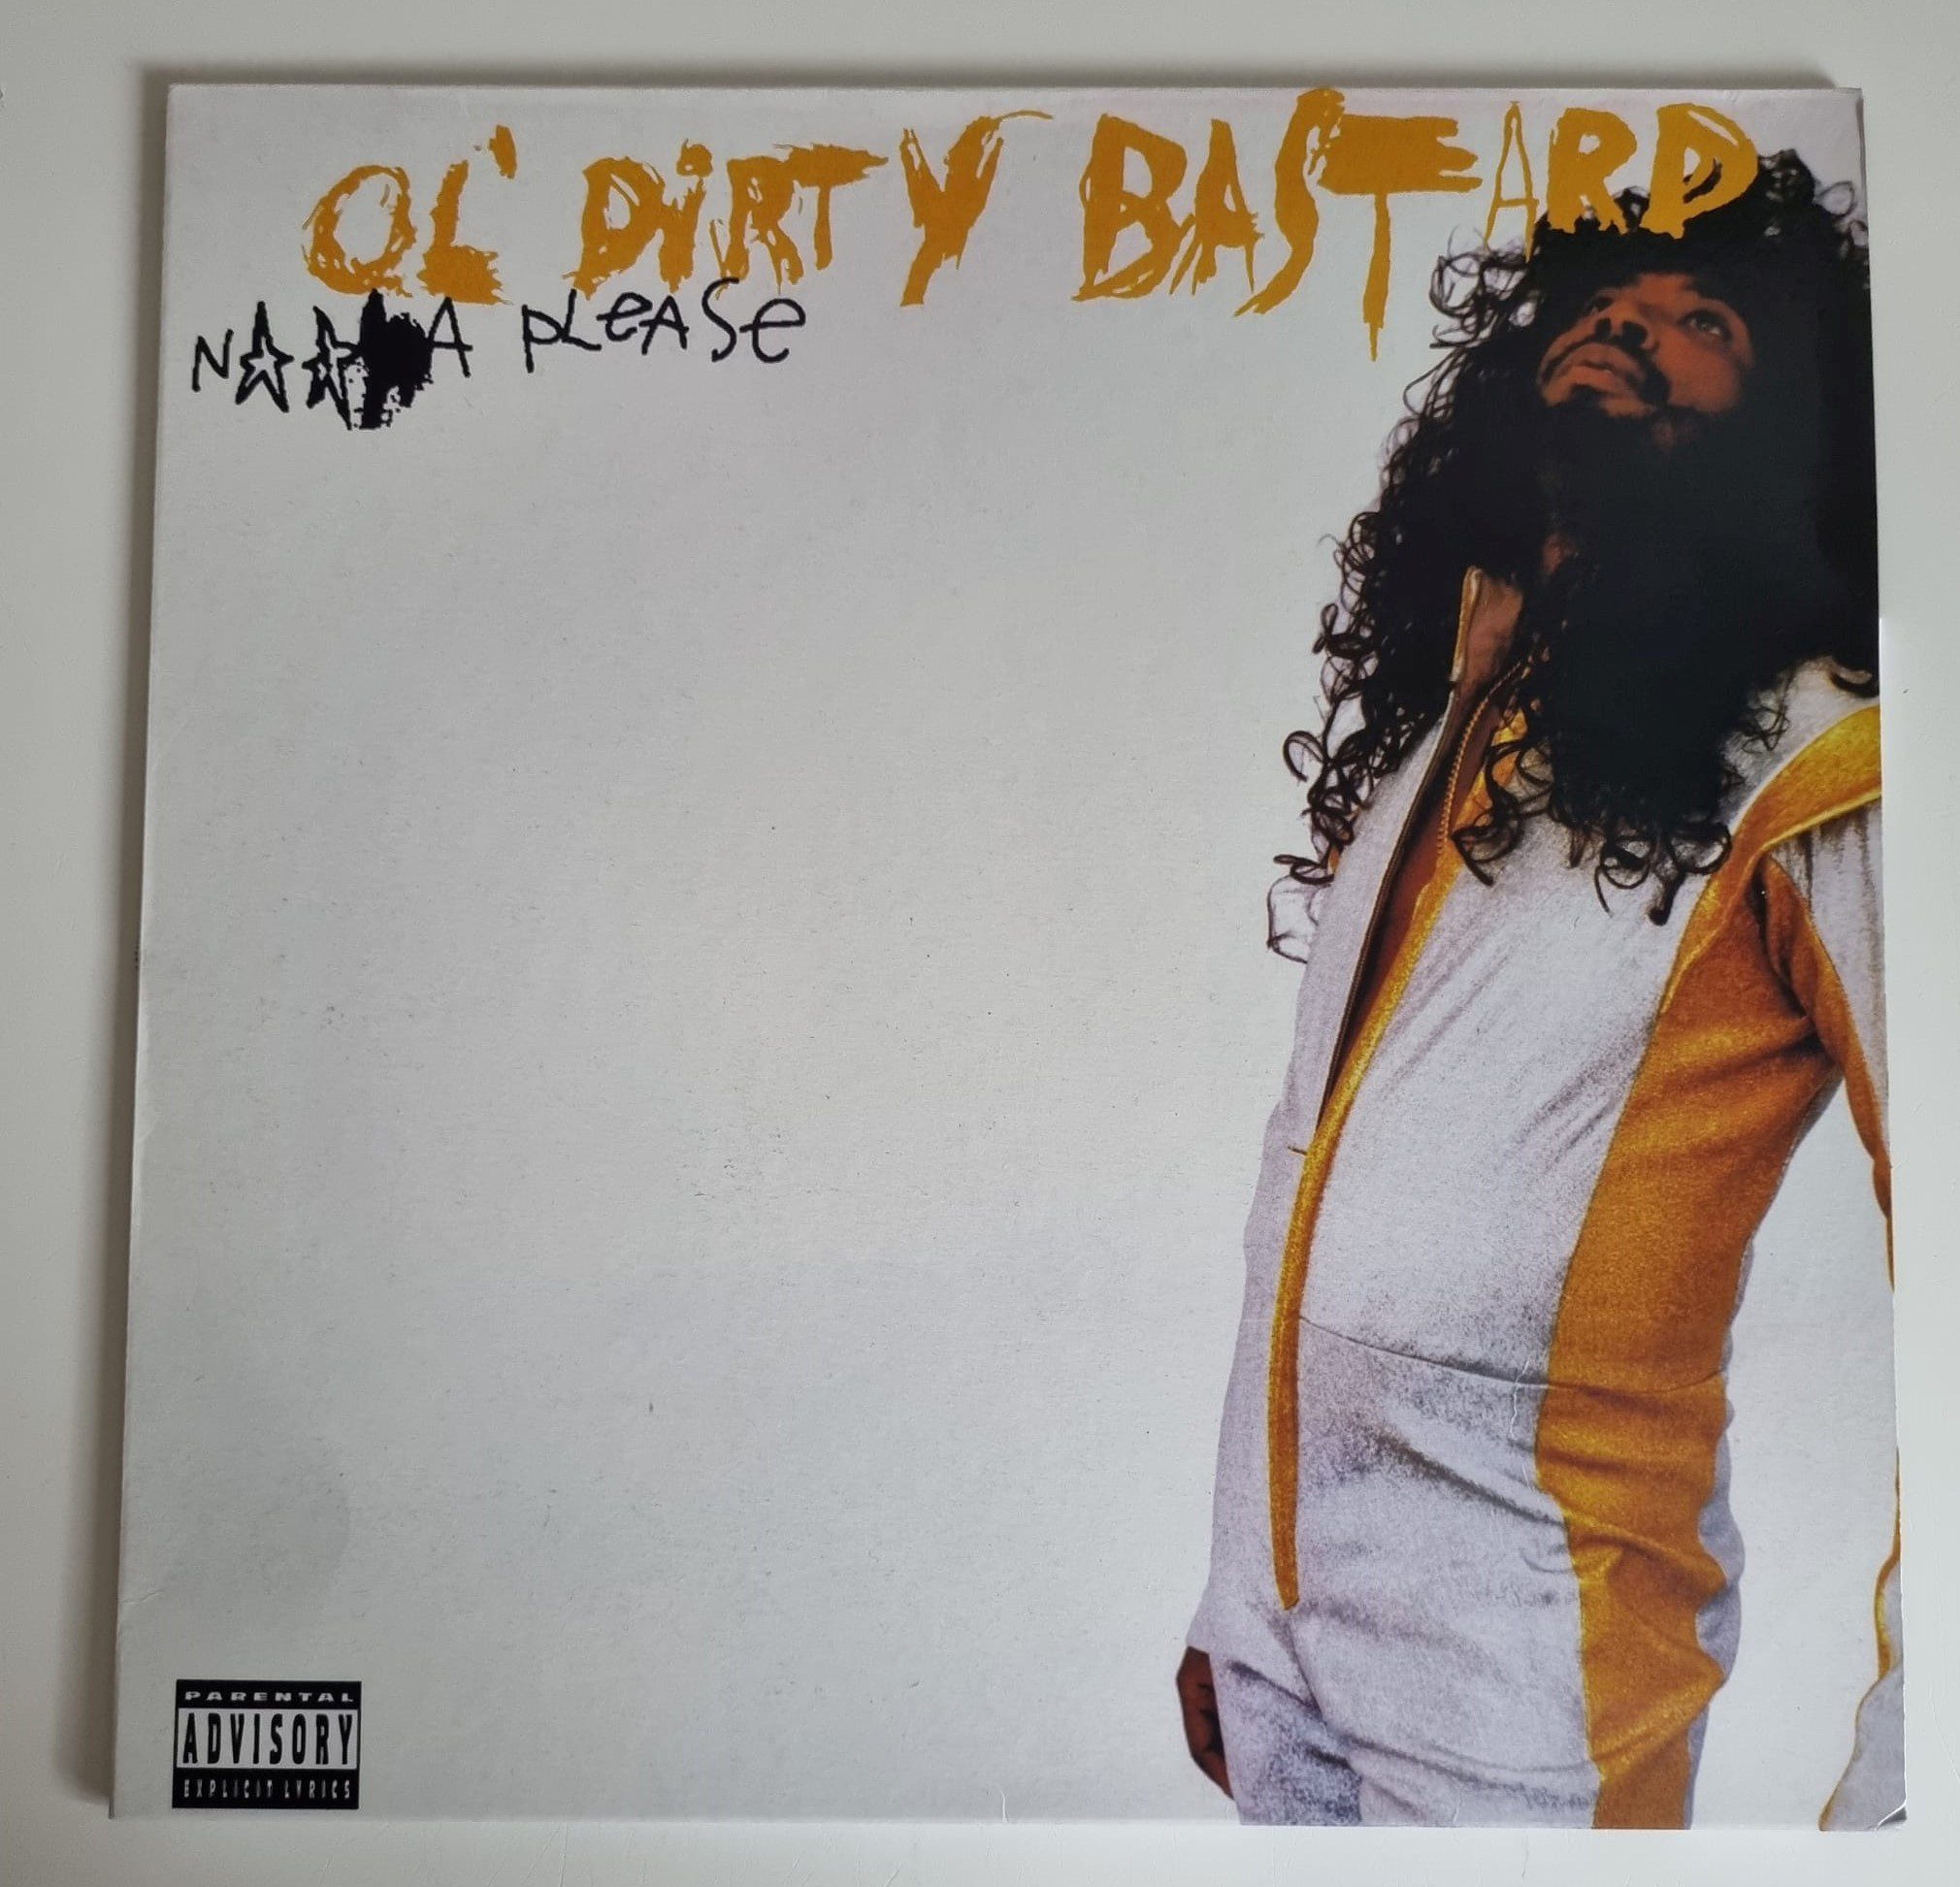 Buy this Rare Oi Dirty Bastard record by clicking here